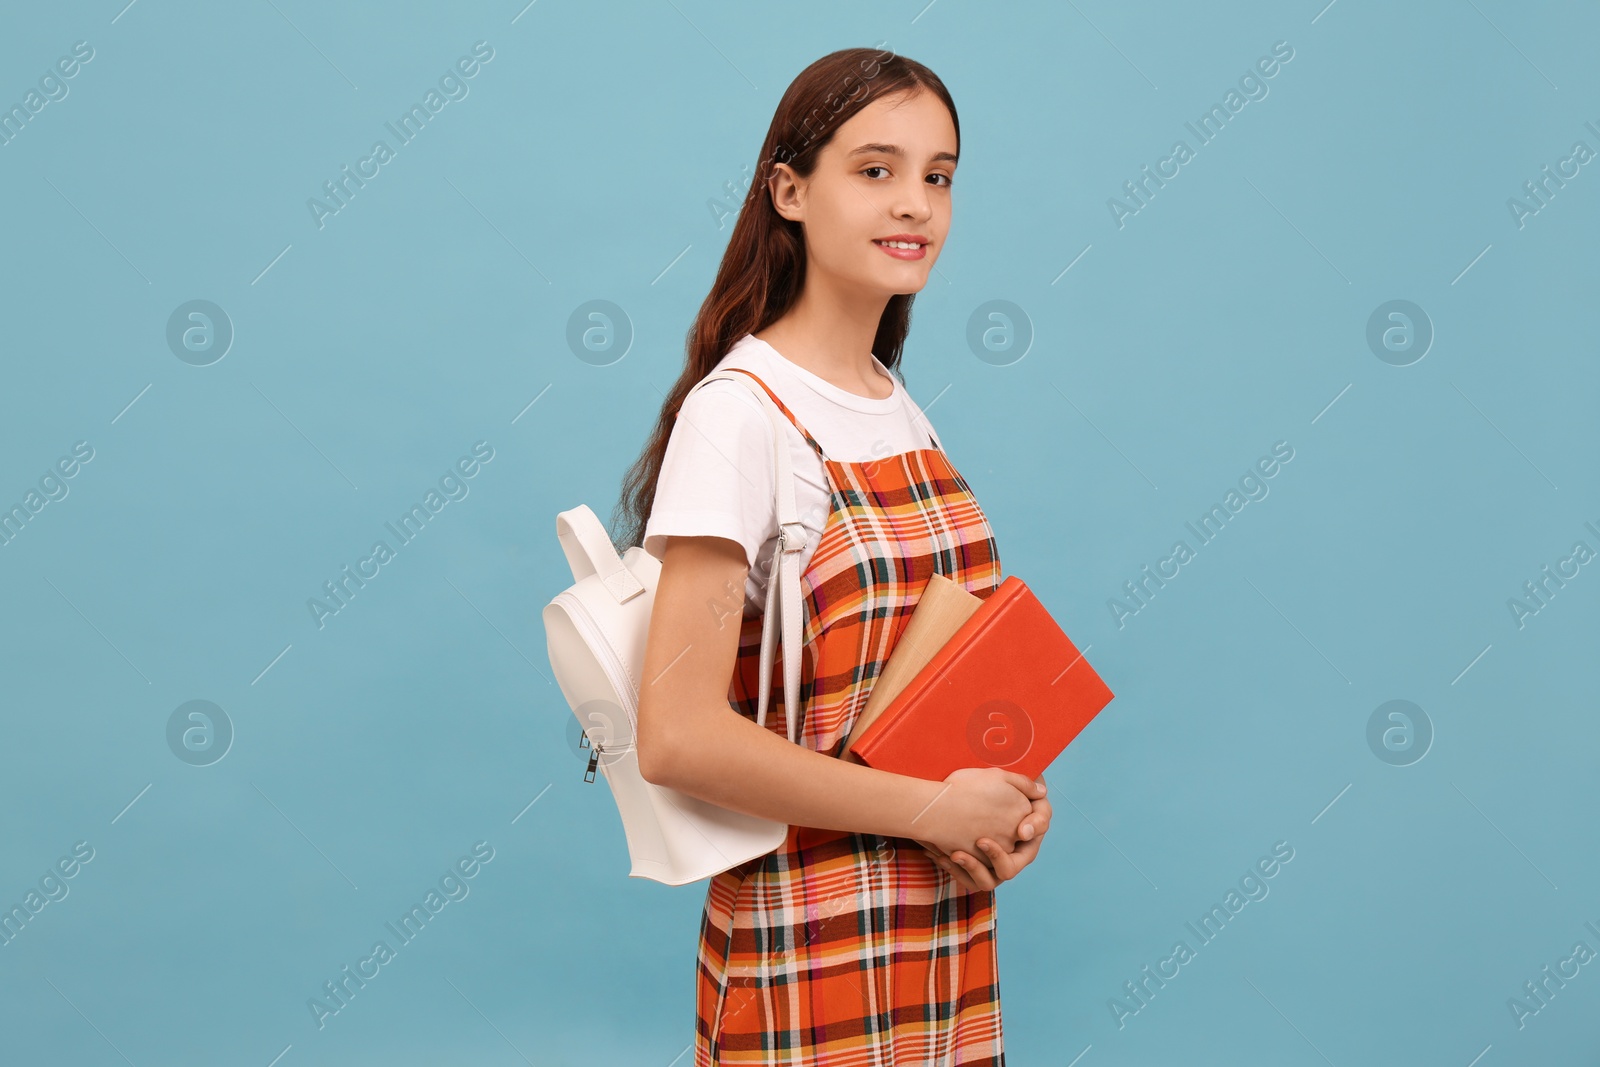 Photo of Teenage student with backpack and books on light blue background